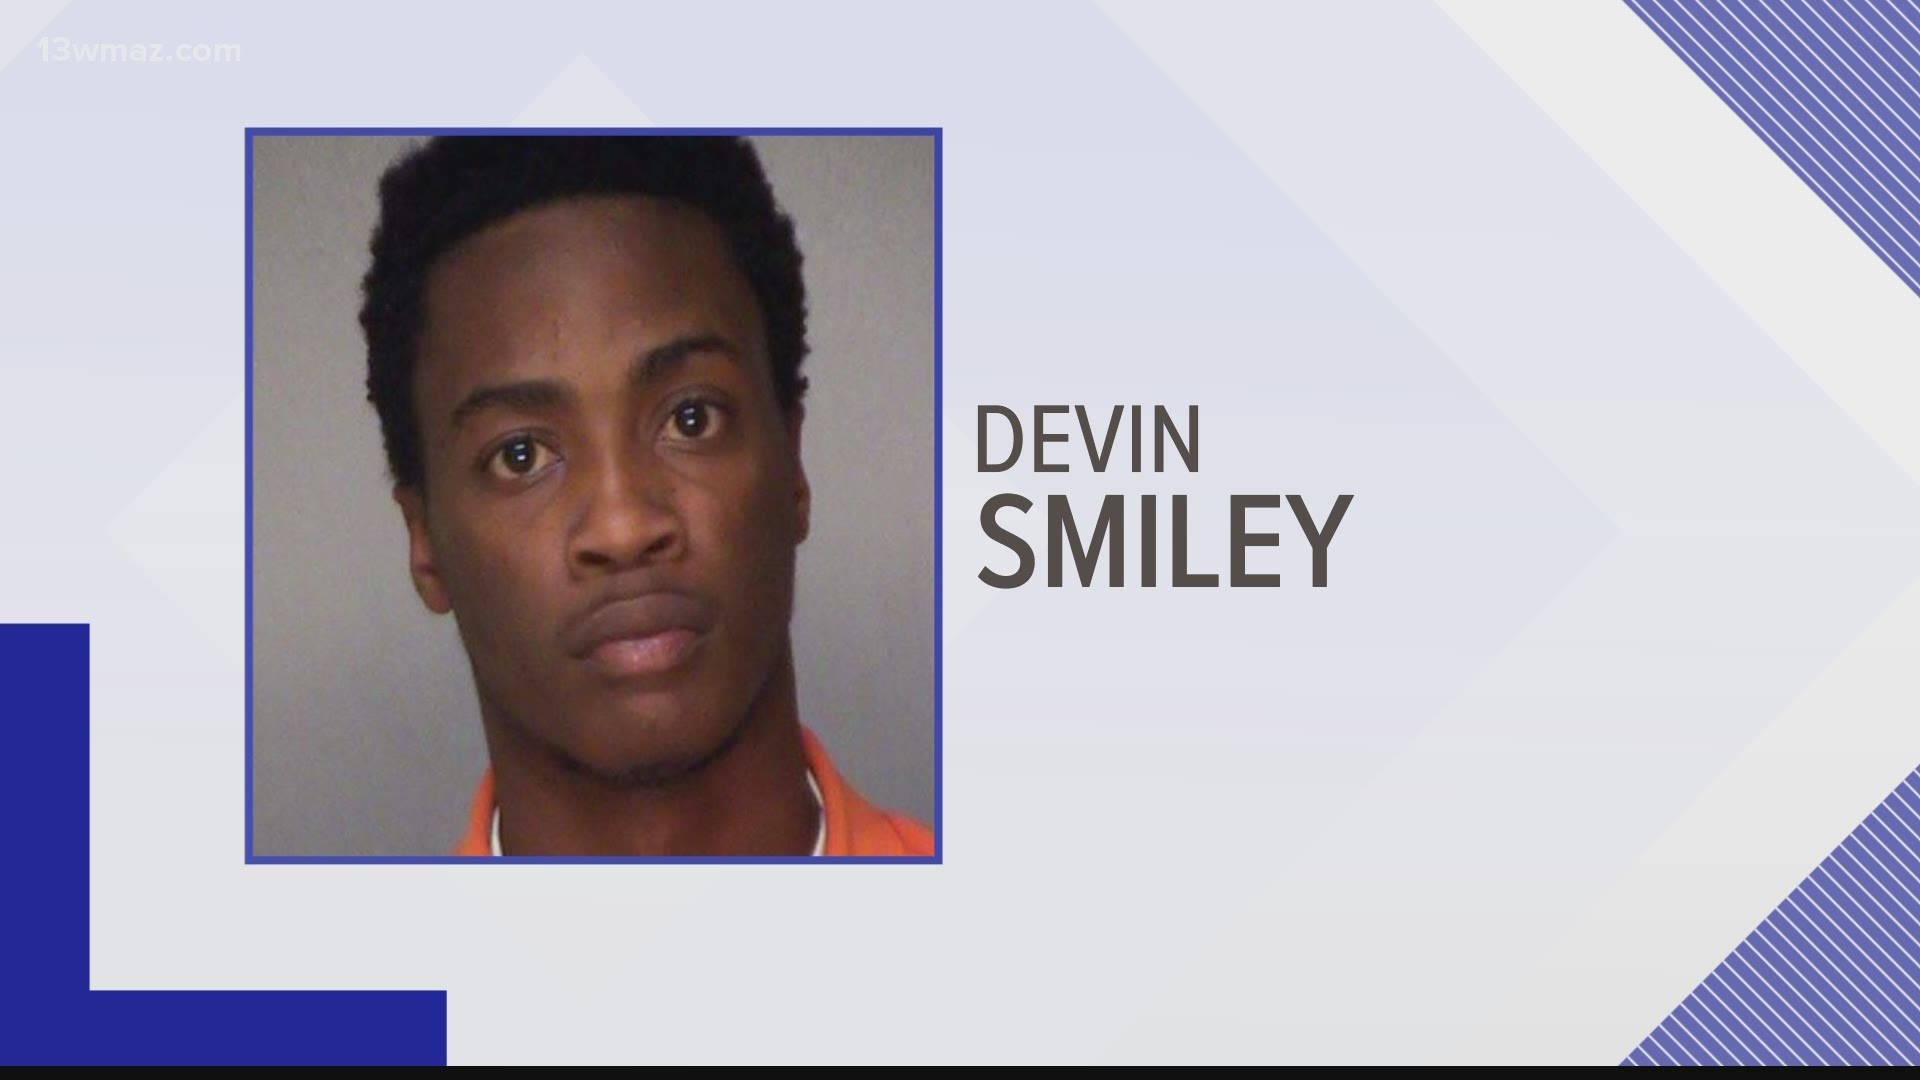 Devin Smiley is charged with murder in connection to the death of 49-year-old Romero Gonzalez